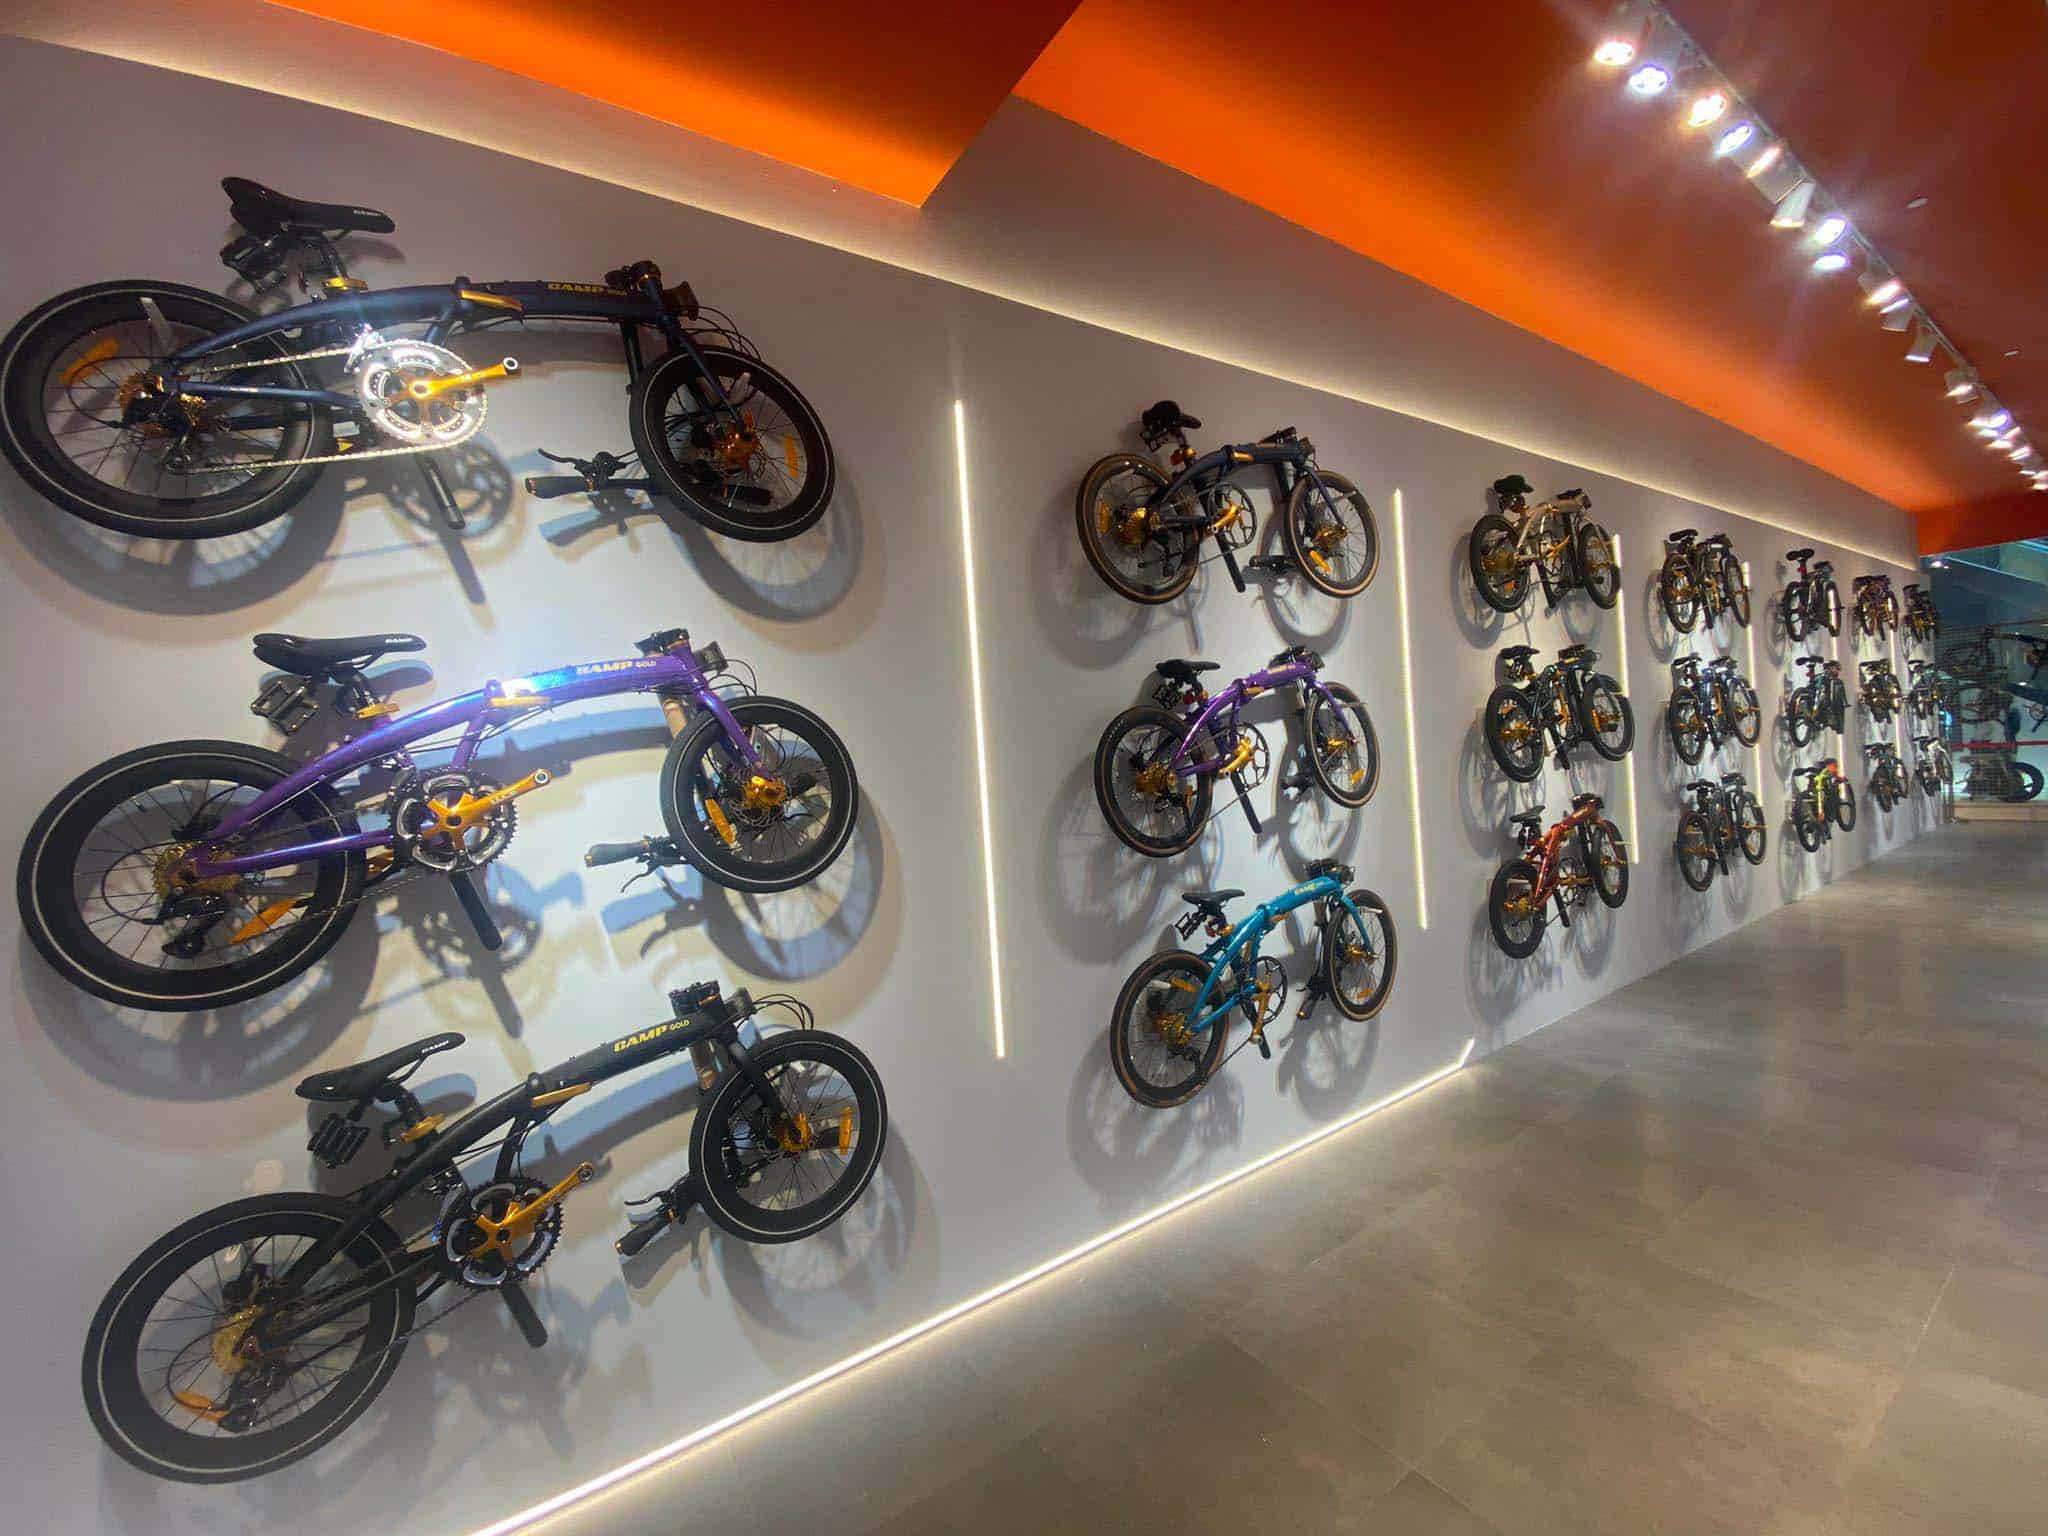 MOBOT x ROYALE opens 7th bicycle shop in Westgate Jurong 3 2048x1536 1 - Press release: MOBOT x ROYALE Opens 7th Bicycle Shop In Westgate Jurong